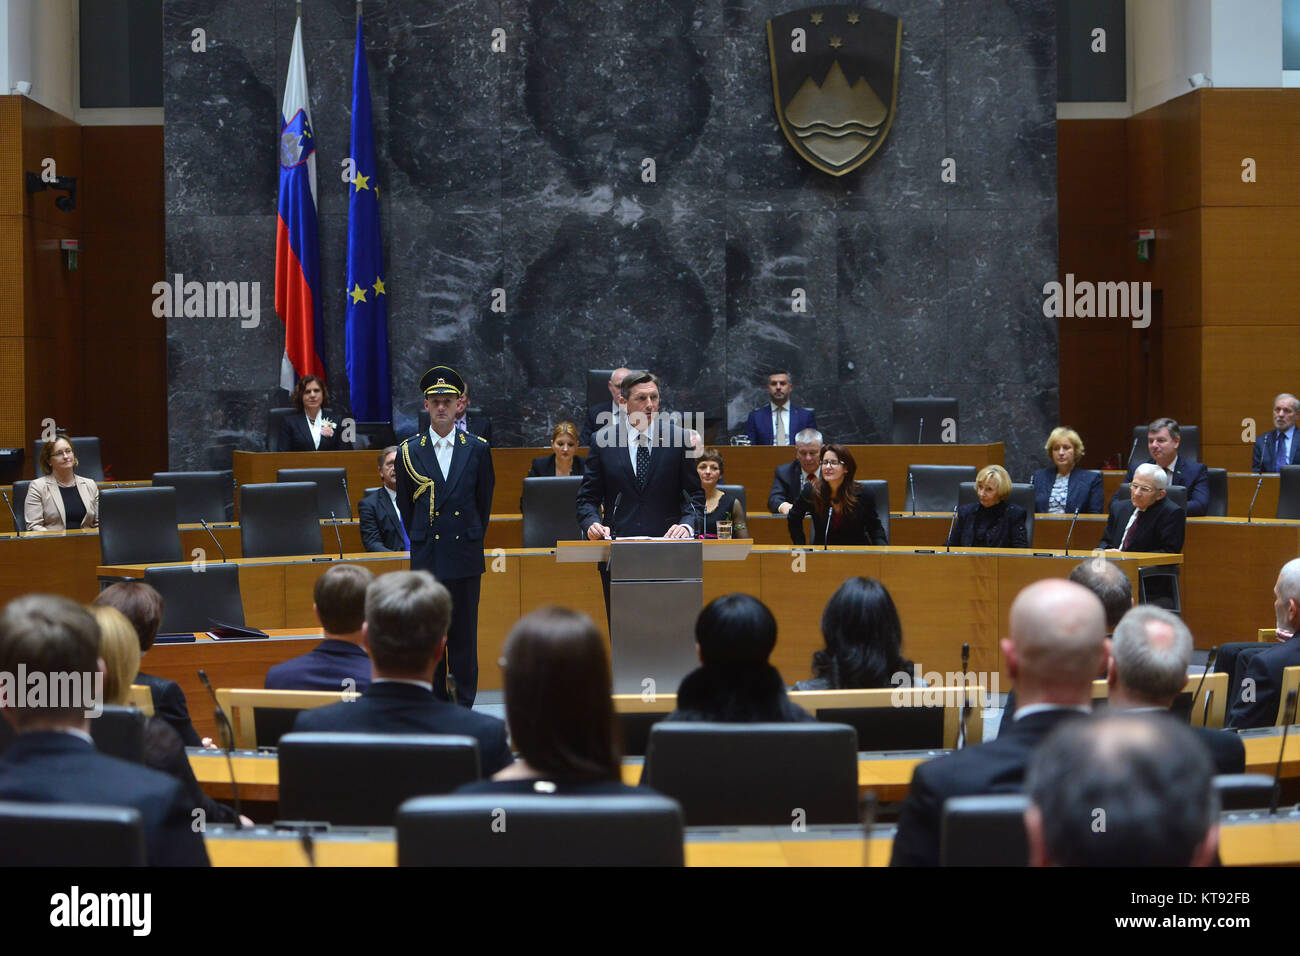 Ljubljana, Slovenia. 22nd Dec, 2017. President of the Republic of Slovenia, Borut Pahor (C), swears in as president at a special National Assembly session in Ljubljana, Slovenia, Dec. 22, 2017. Slovenian President Borut Pahor was sowrn in at the National Assembly on Friday and will formally start his second five-year term on Saturday, the Slovenian Press Agency (STA) reported. Credit: Matic Stojs/Xinhua/Alamy Live News Stock Photo